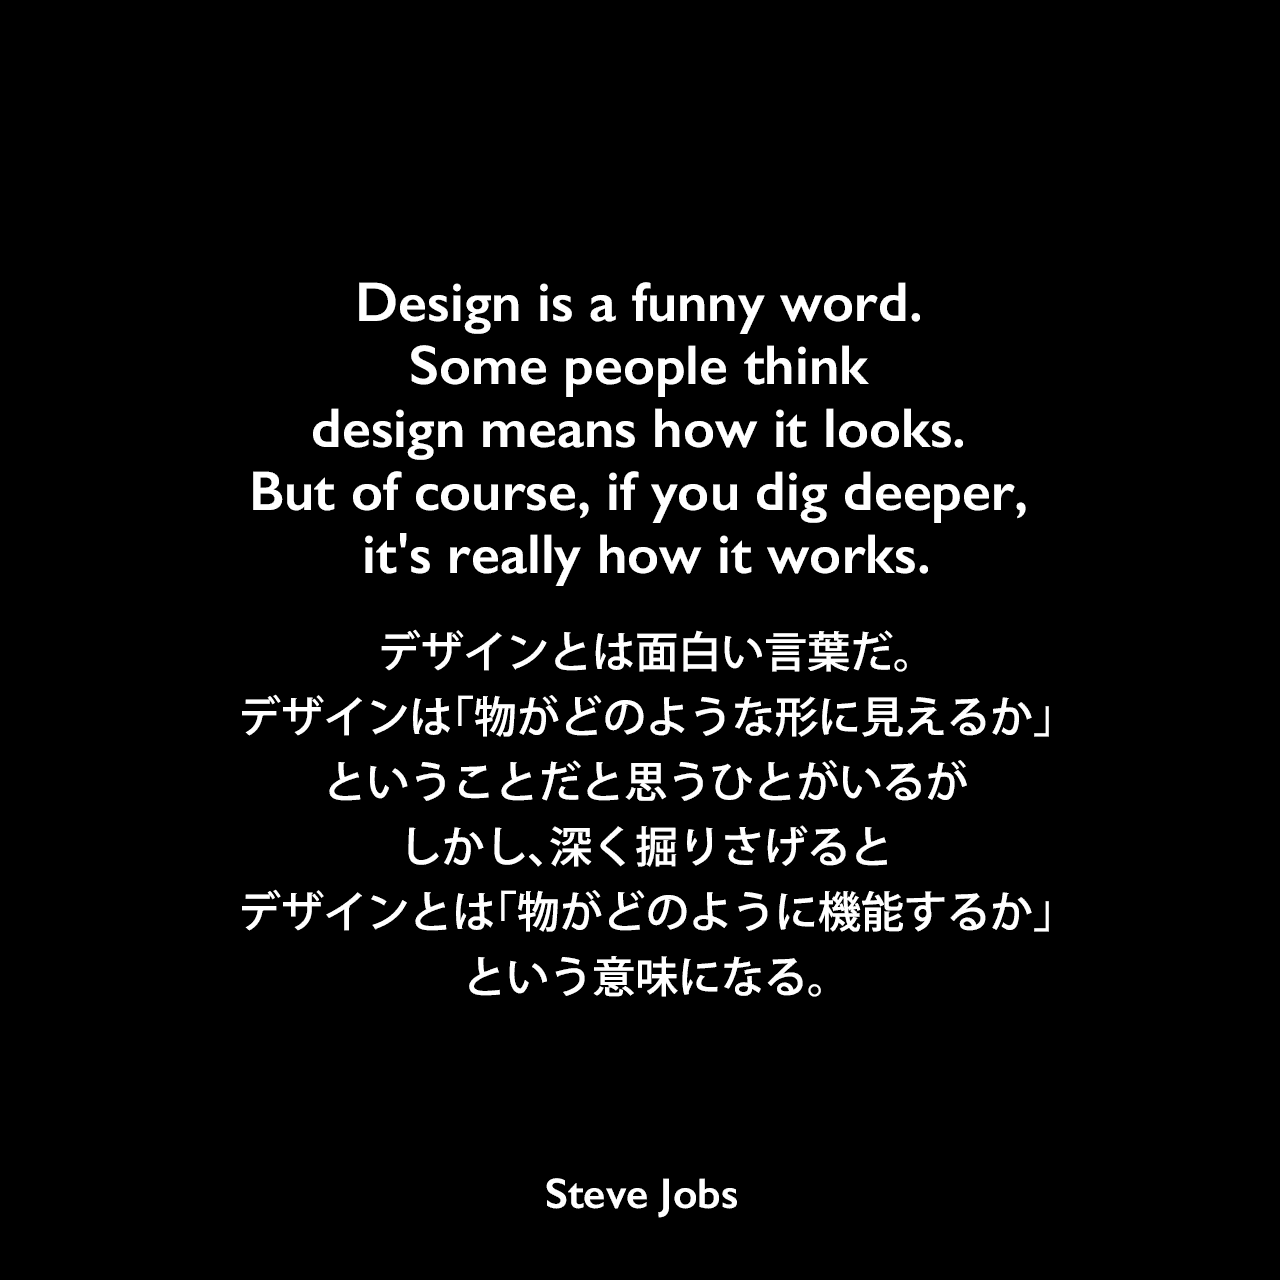 Design is a funny word. Some people think design means how it looks. But of course, if you dig deeper, it's really how it works.デザインとは面白い言葉だ。デザインは「物がどのような形に見えるか」ということだと思うひとがいるが、しかし、深く掘りさげると、デザインとは「物がどのように機能するか」という意味になる。Steve Jobs